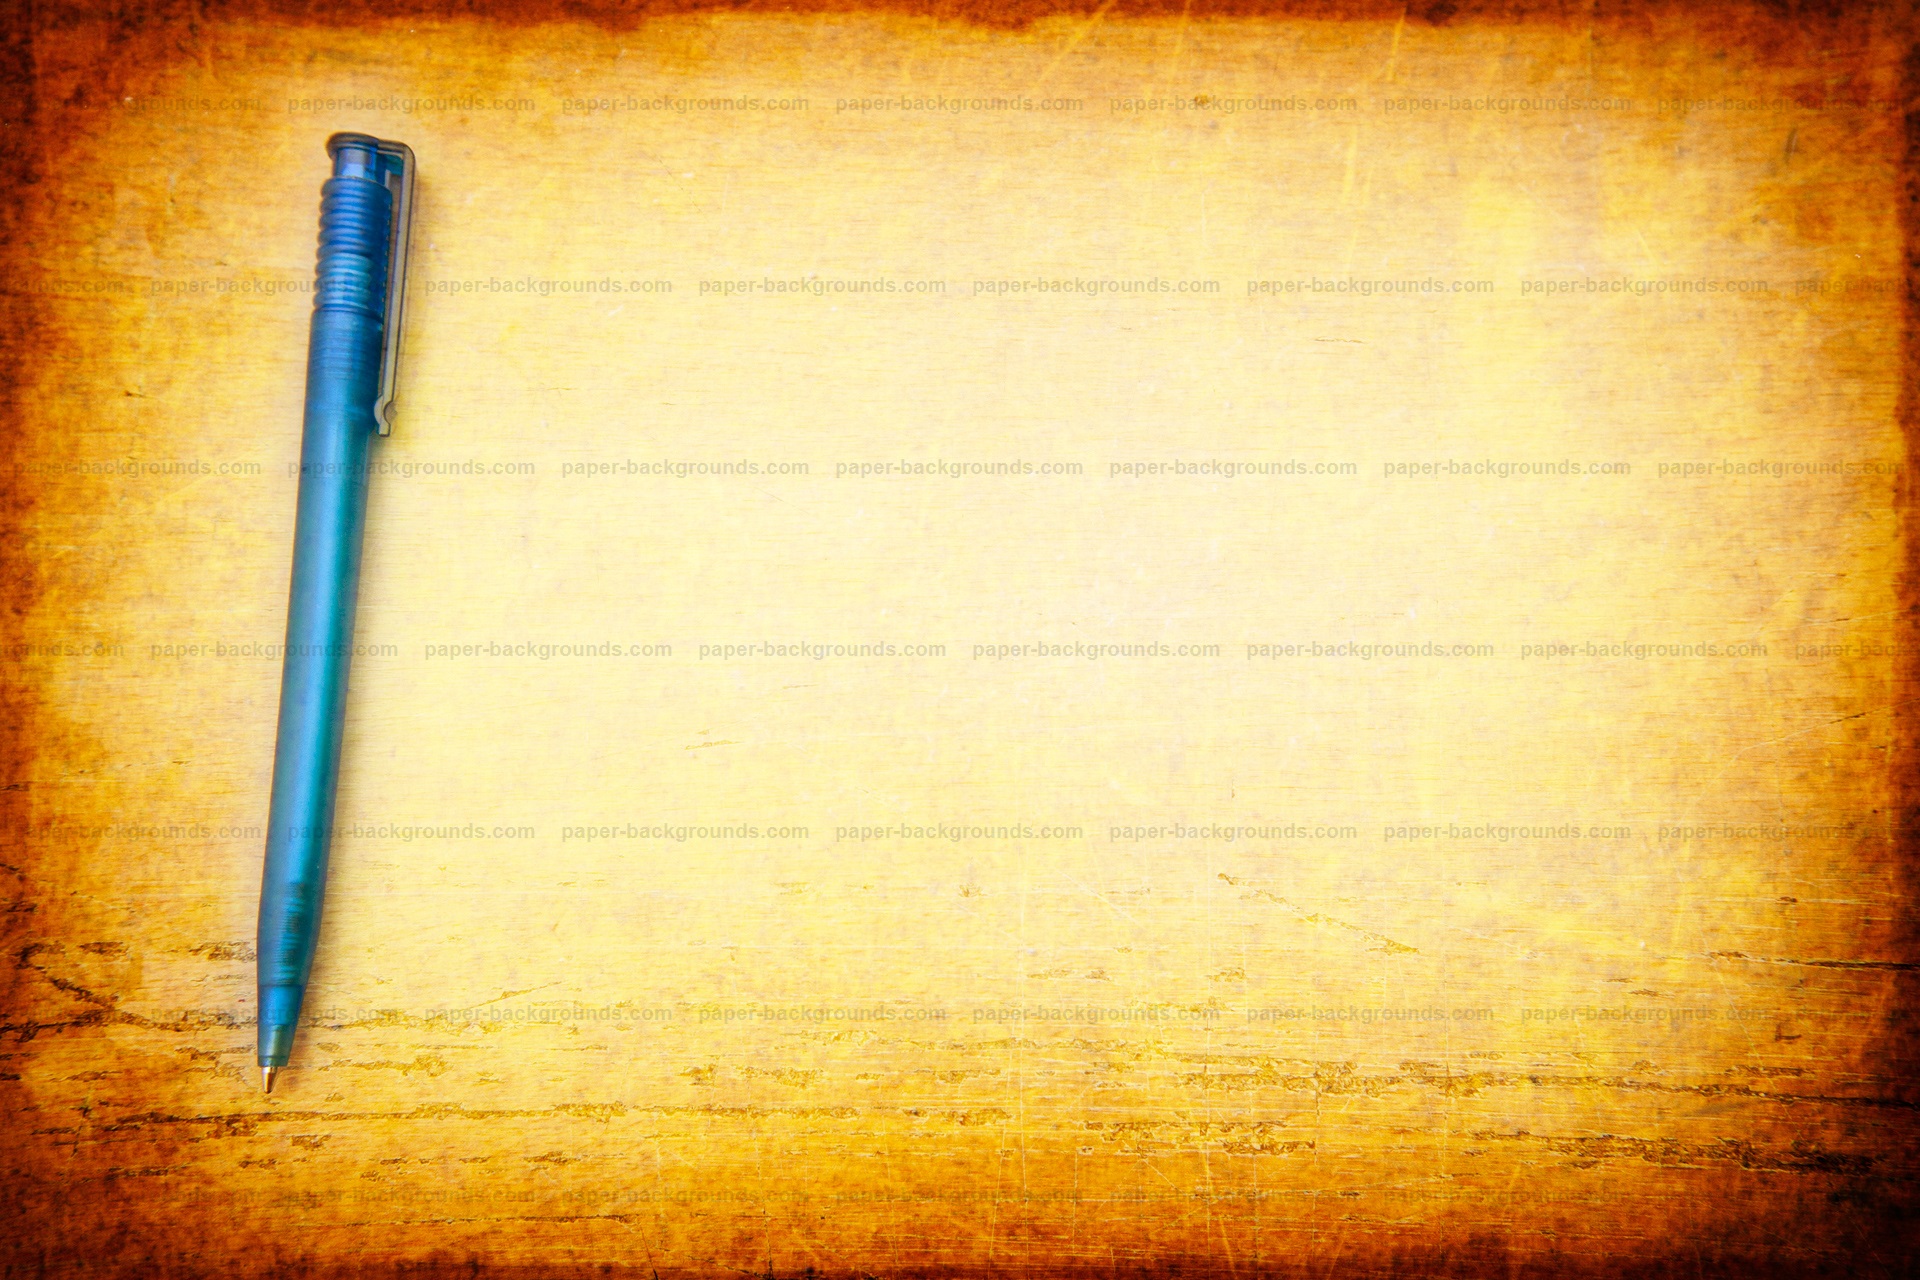 Paper Background Pen On Table Vintage Background HD